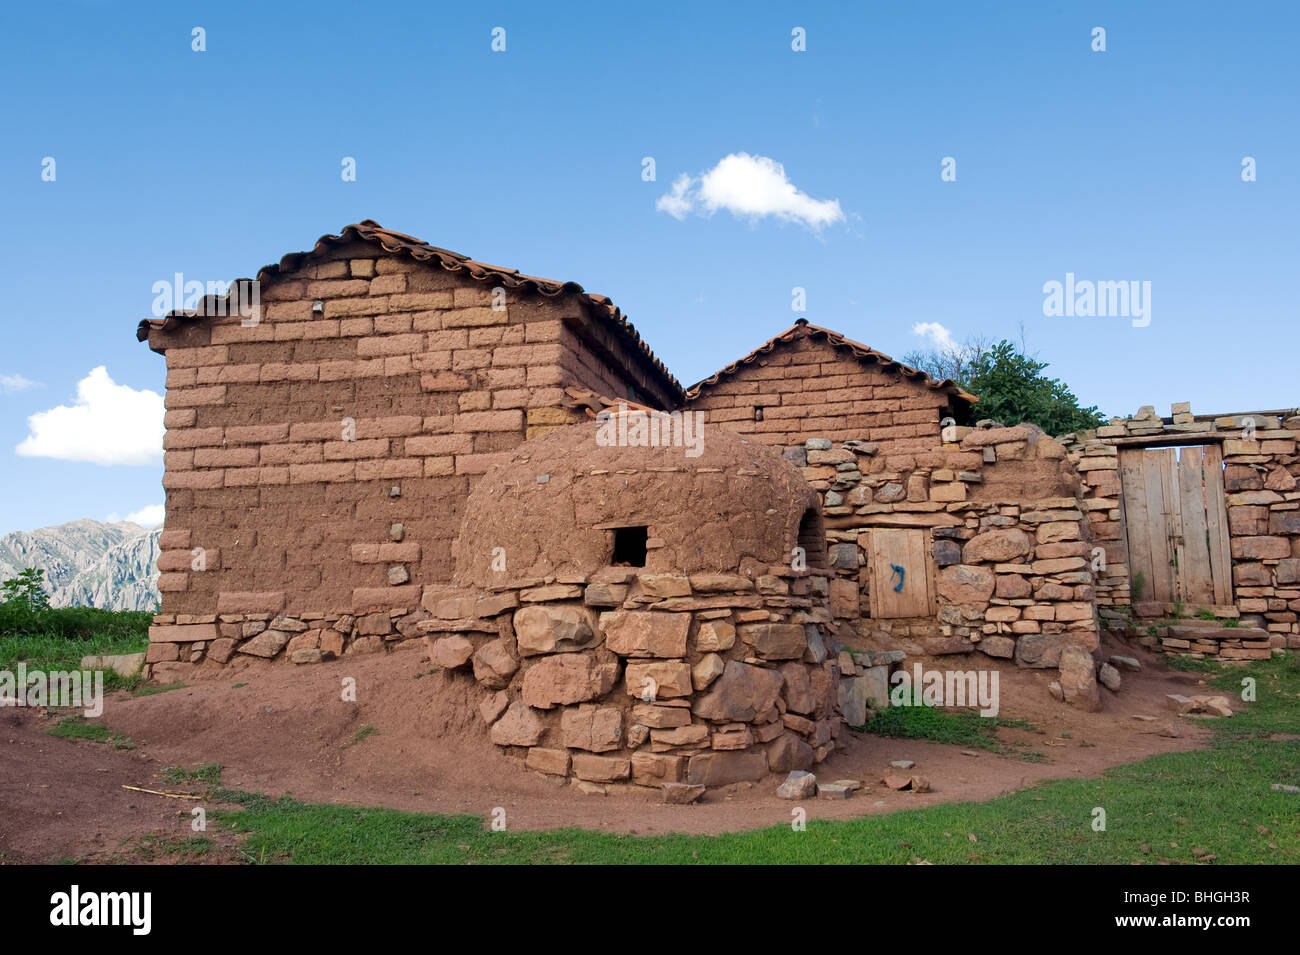 Village of Maragua, in the countryside of Bolivia. Stock Photo